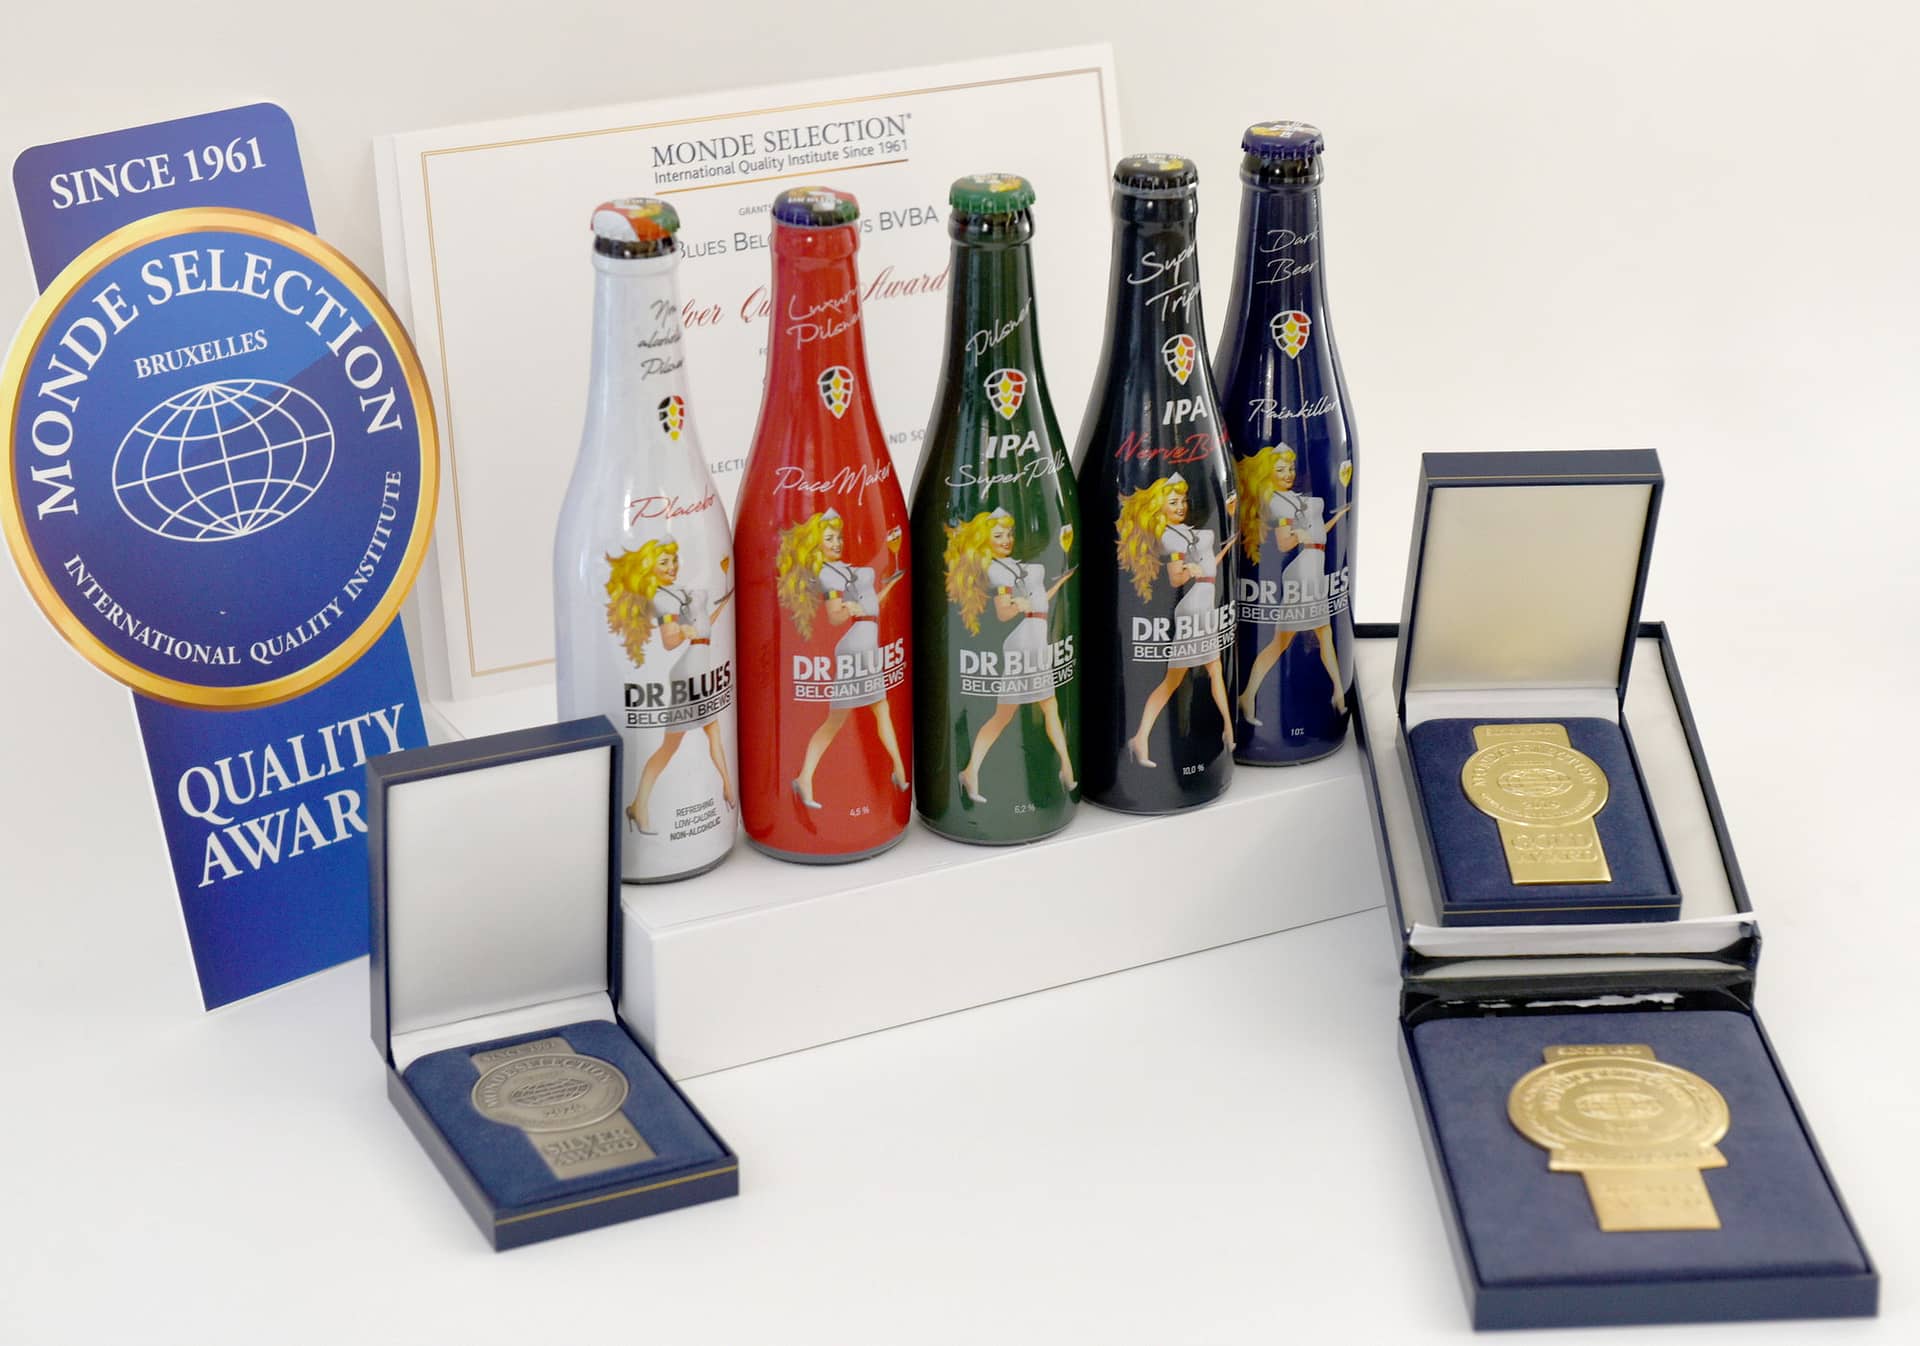 Monde Selection Quality Award for beers